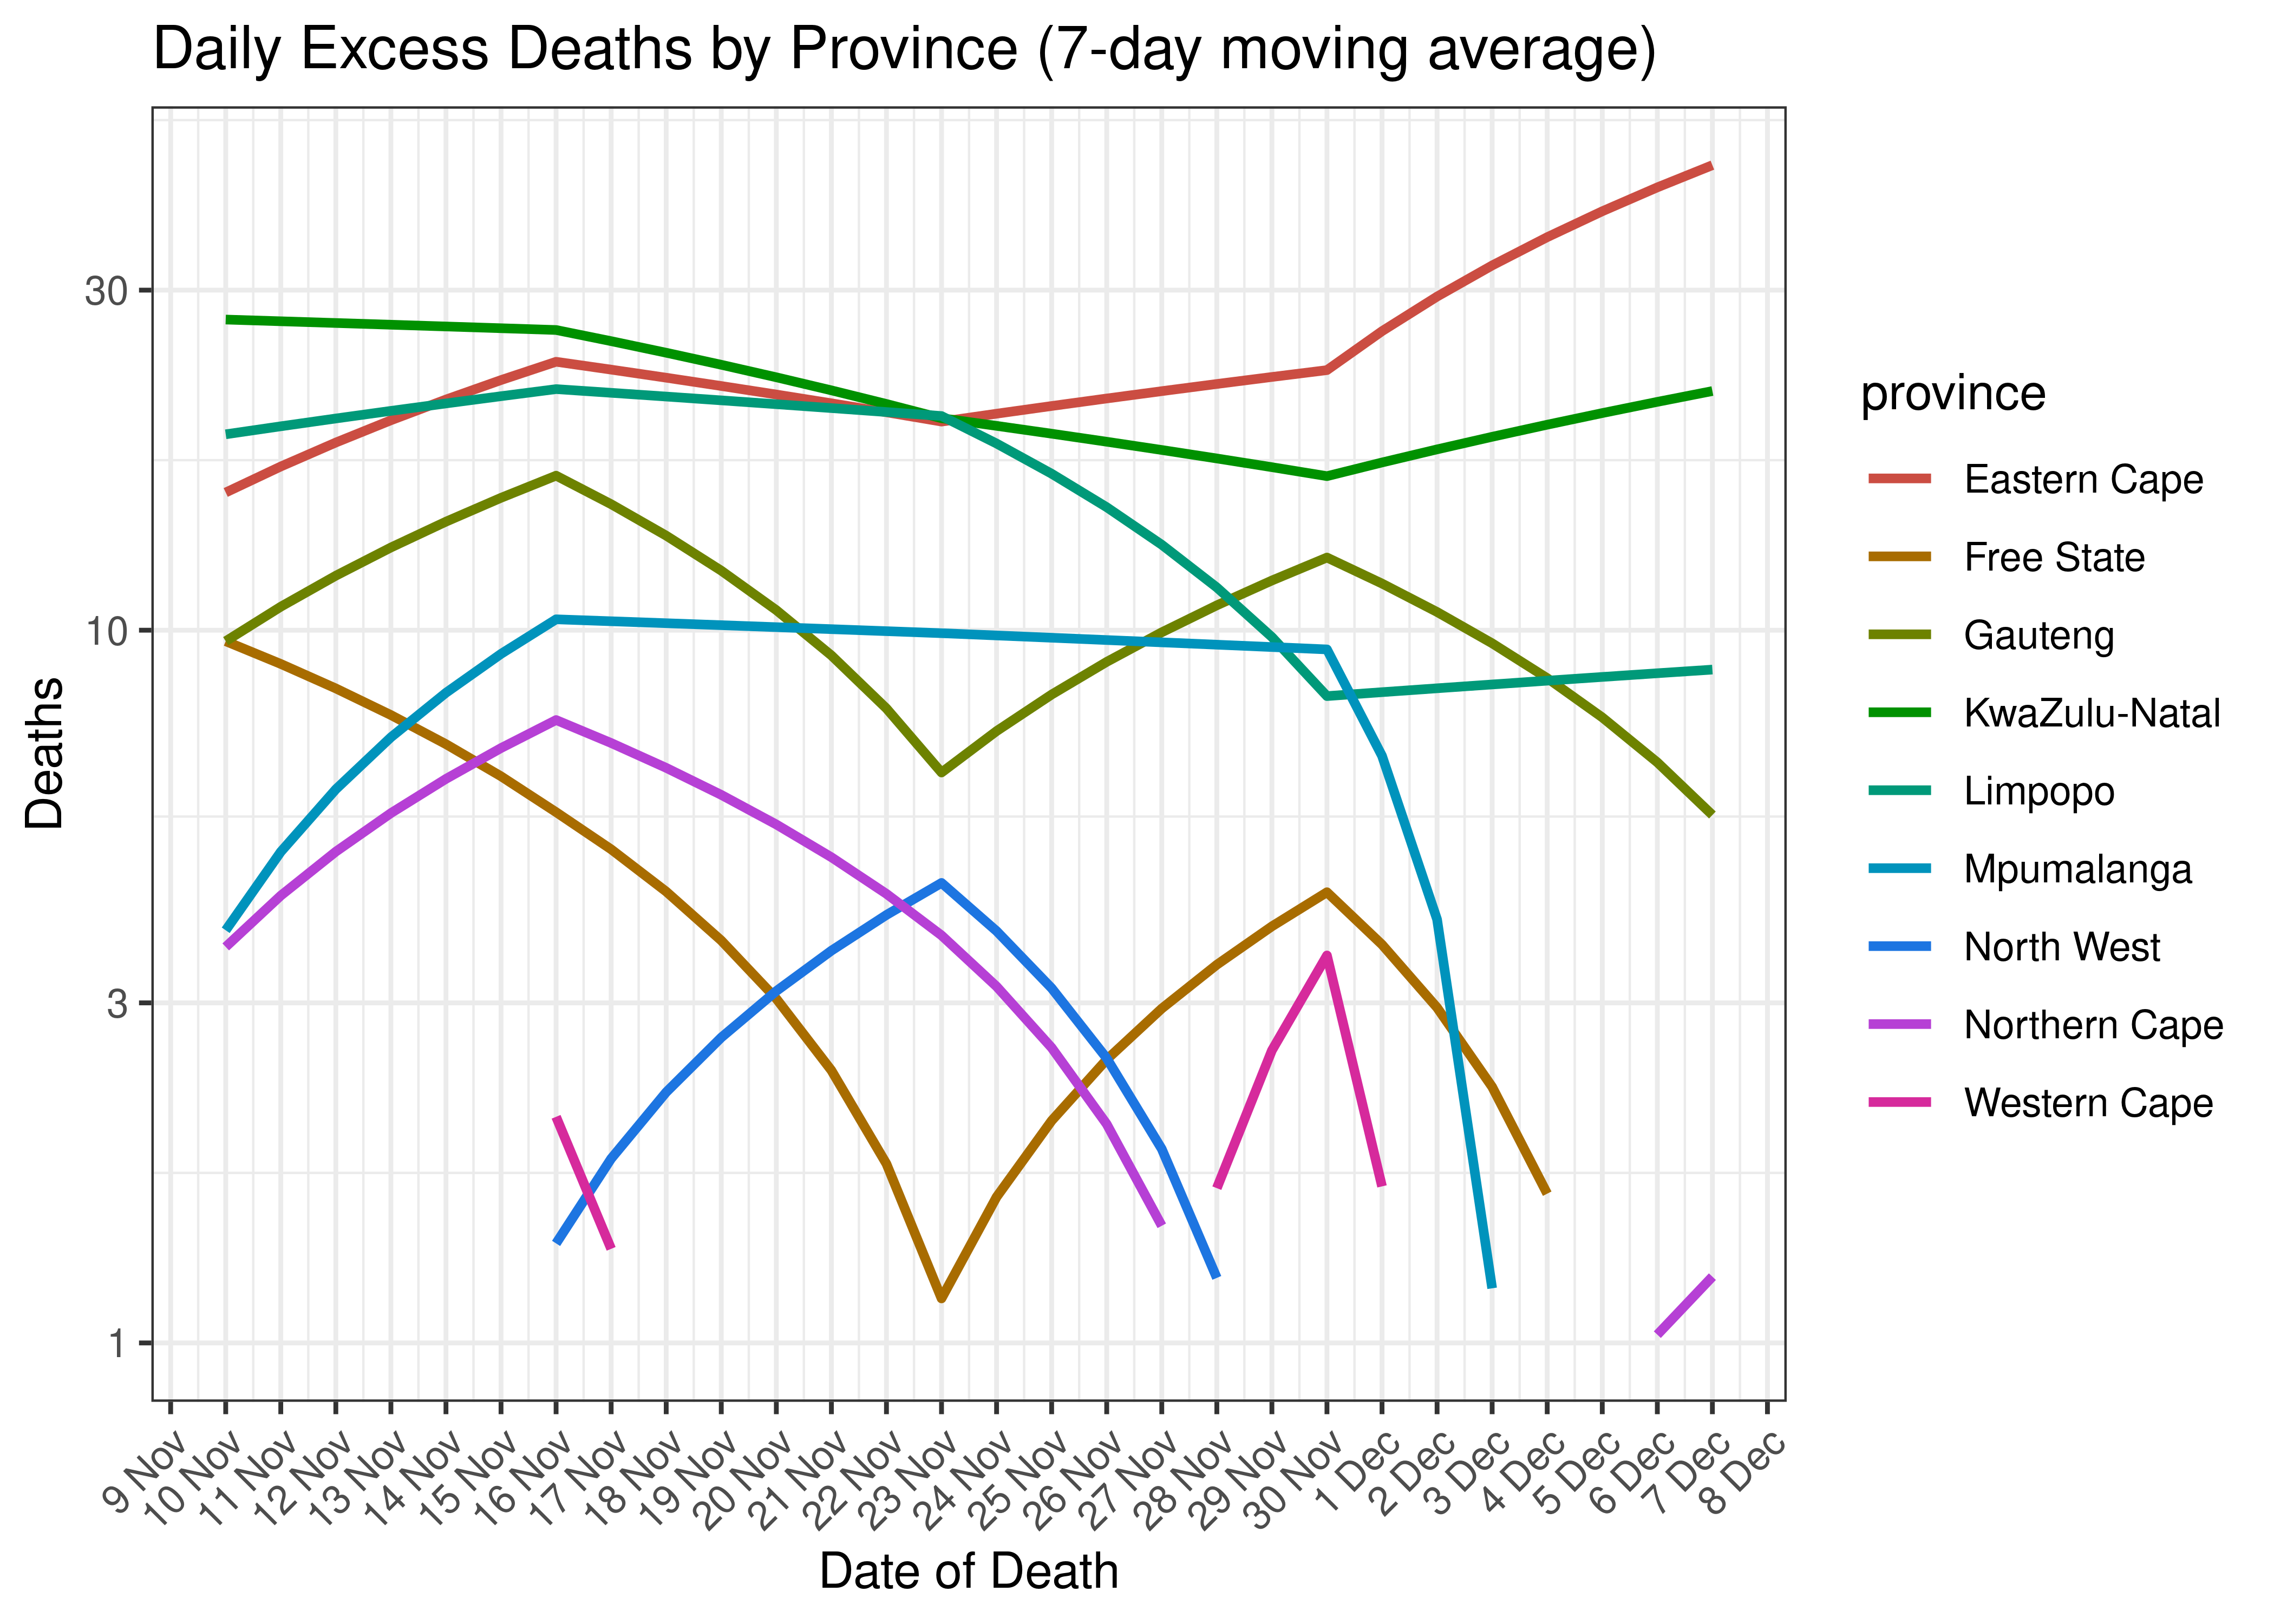 Daily Excess Deaths for Last 30-days by Province (7-day moving average)